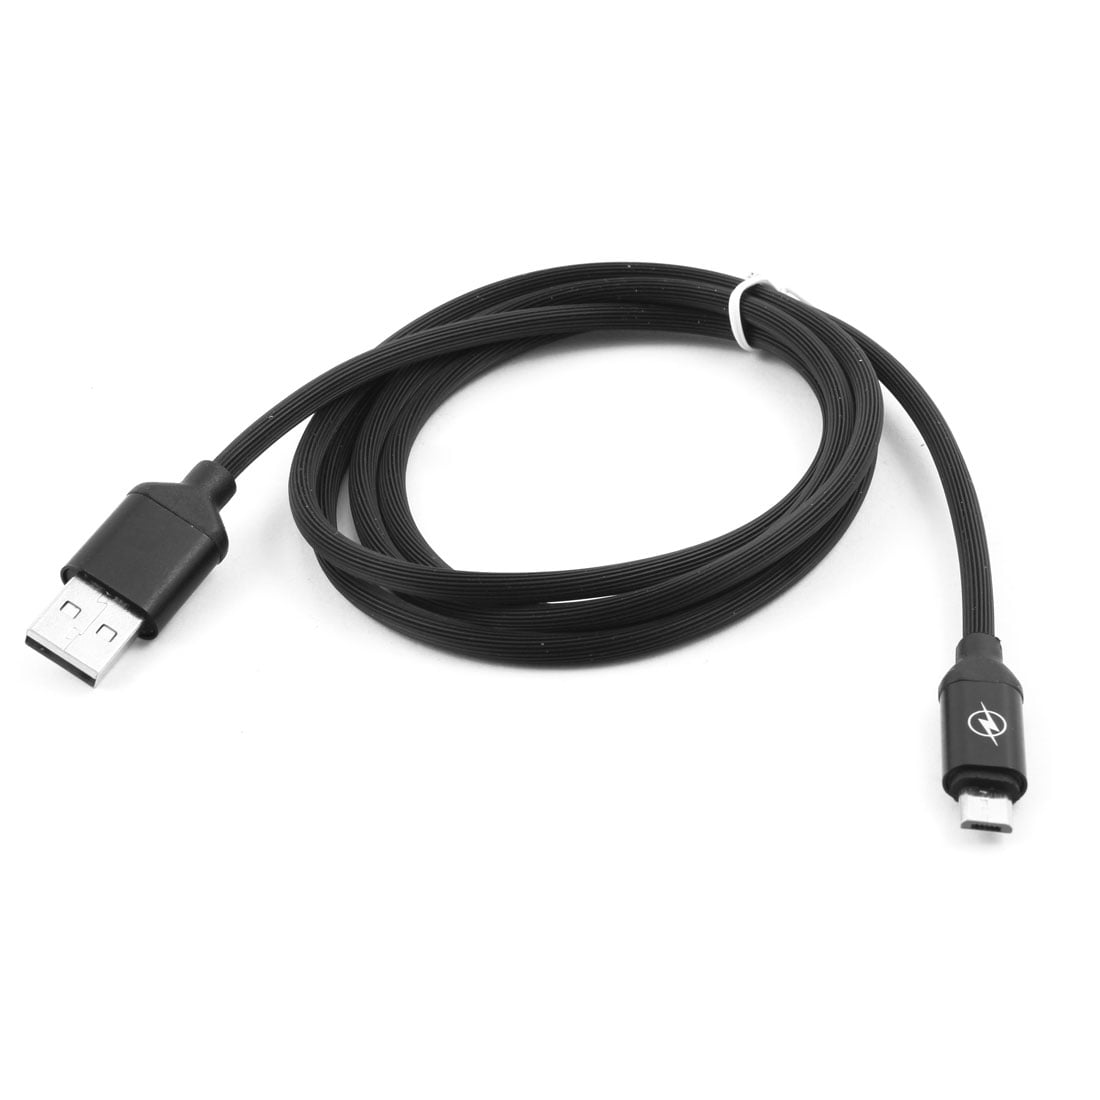 usb to usb data transfer cable for windows and mac